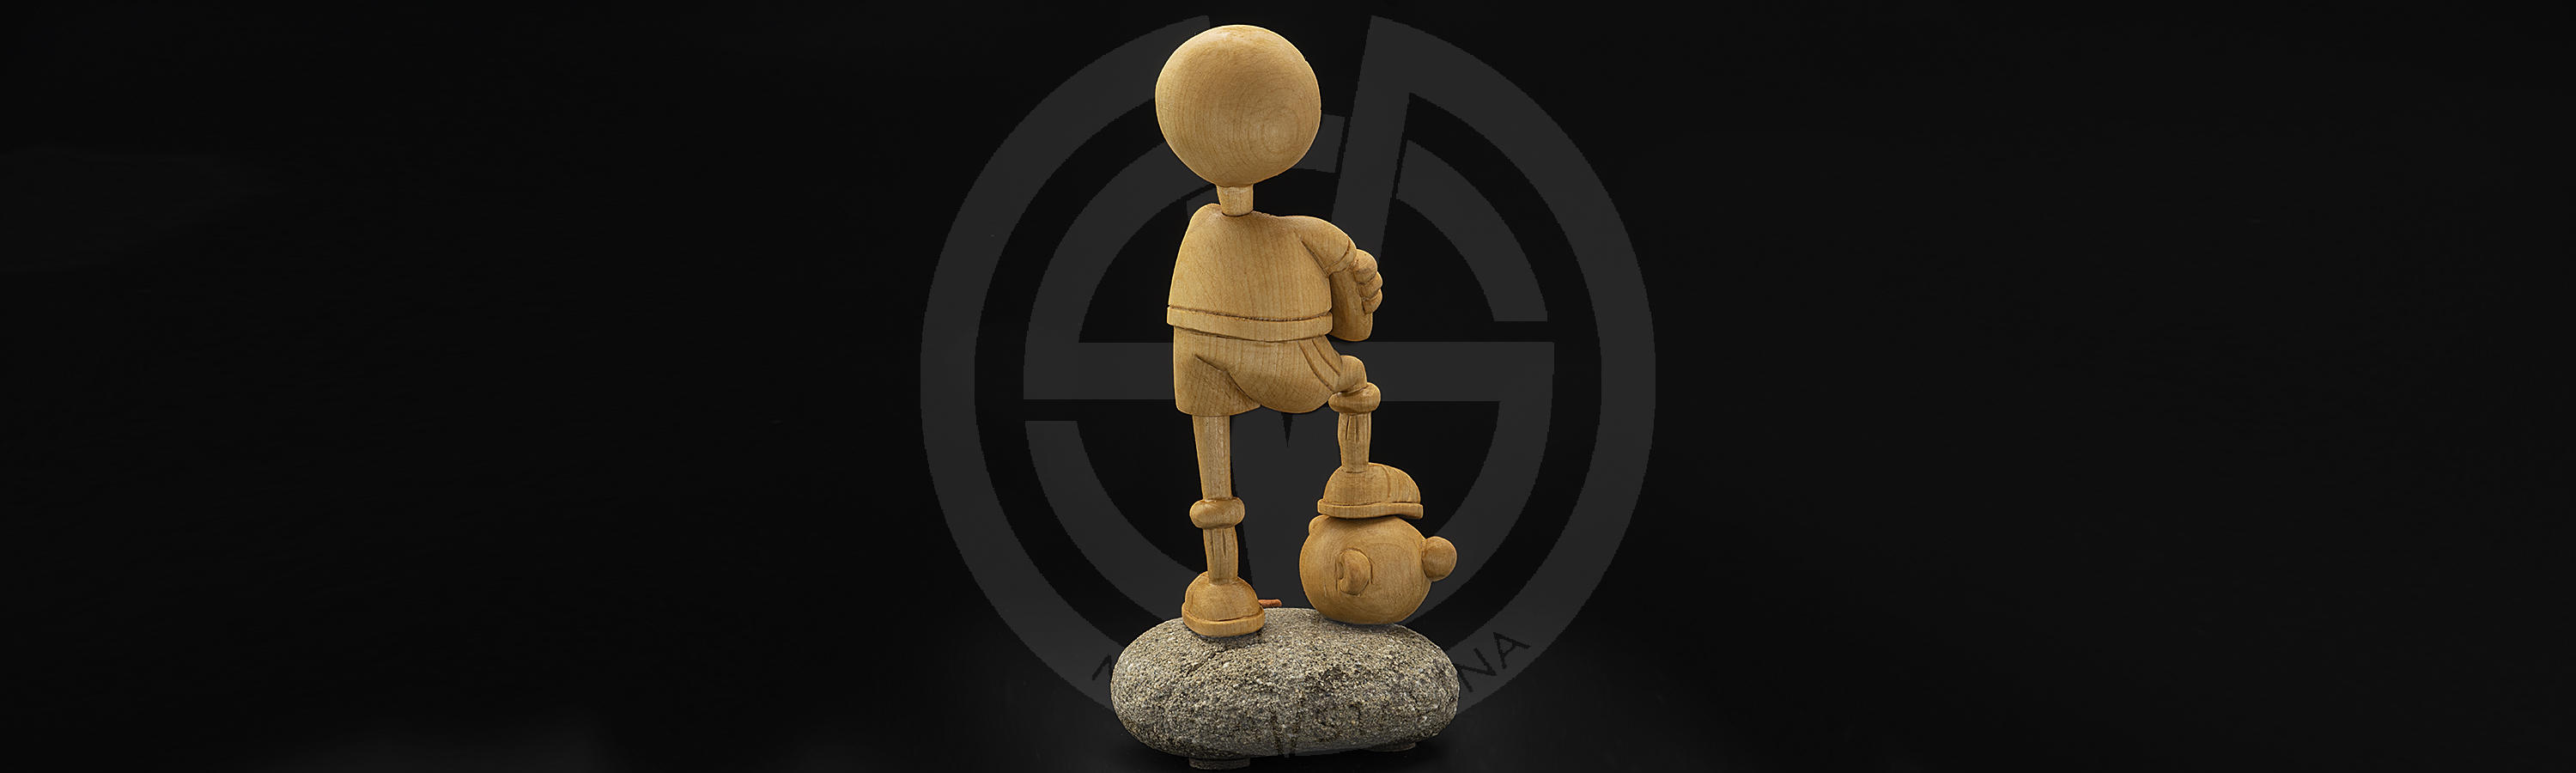 Cool wooden figurine The football star